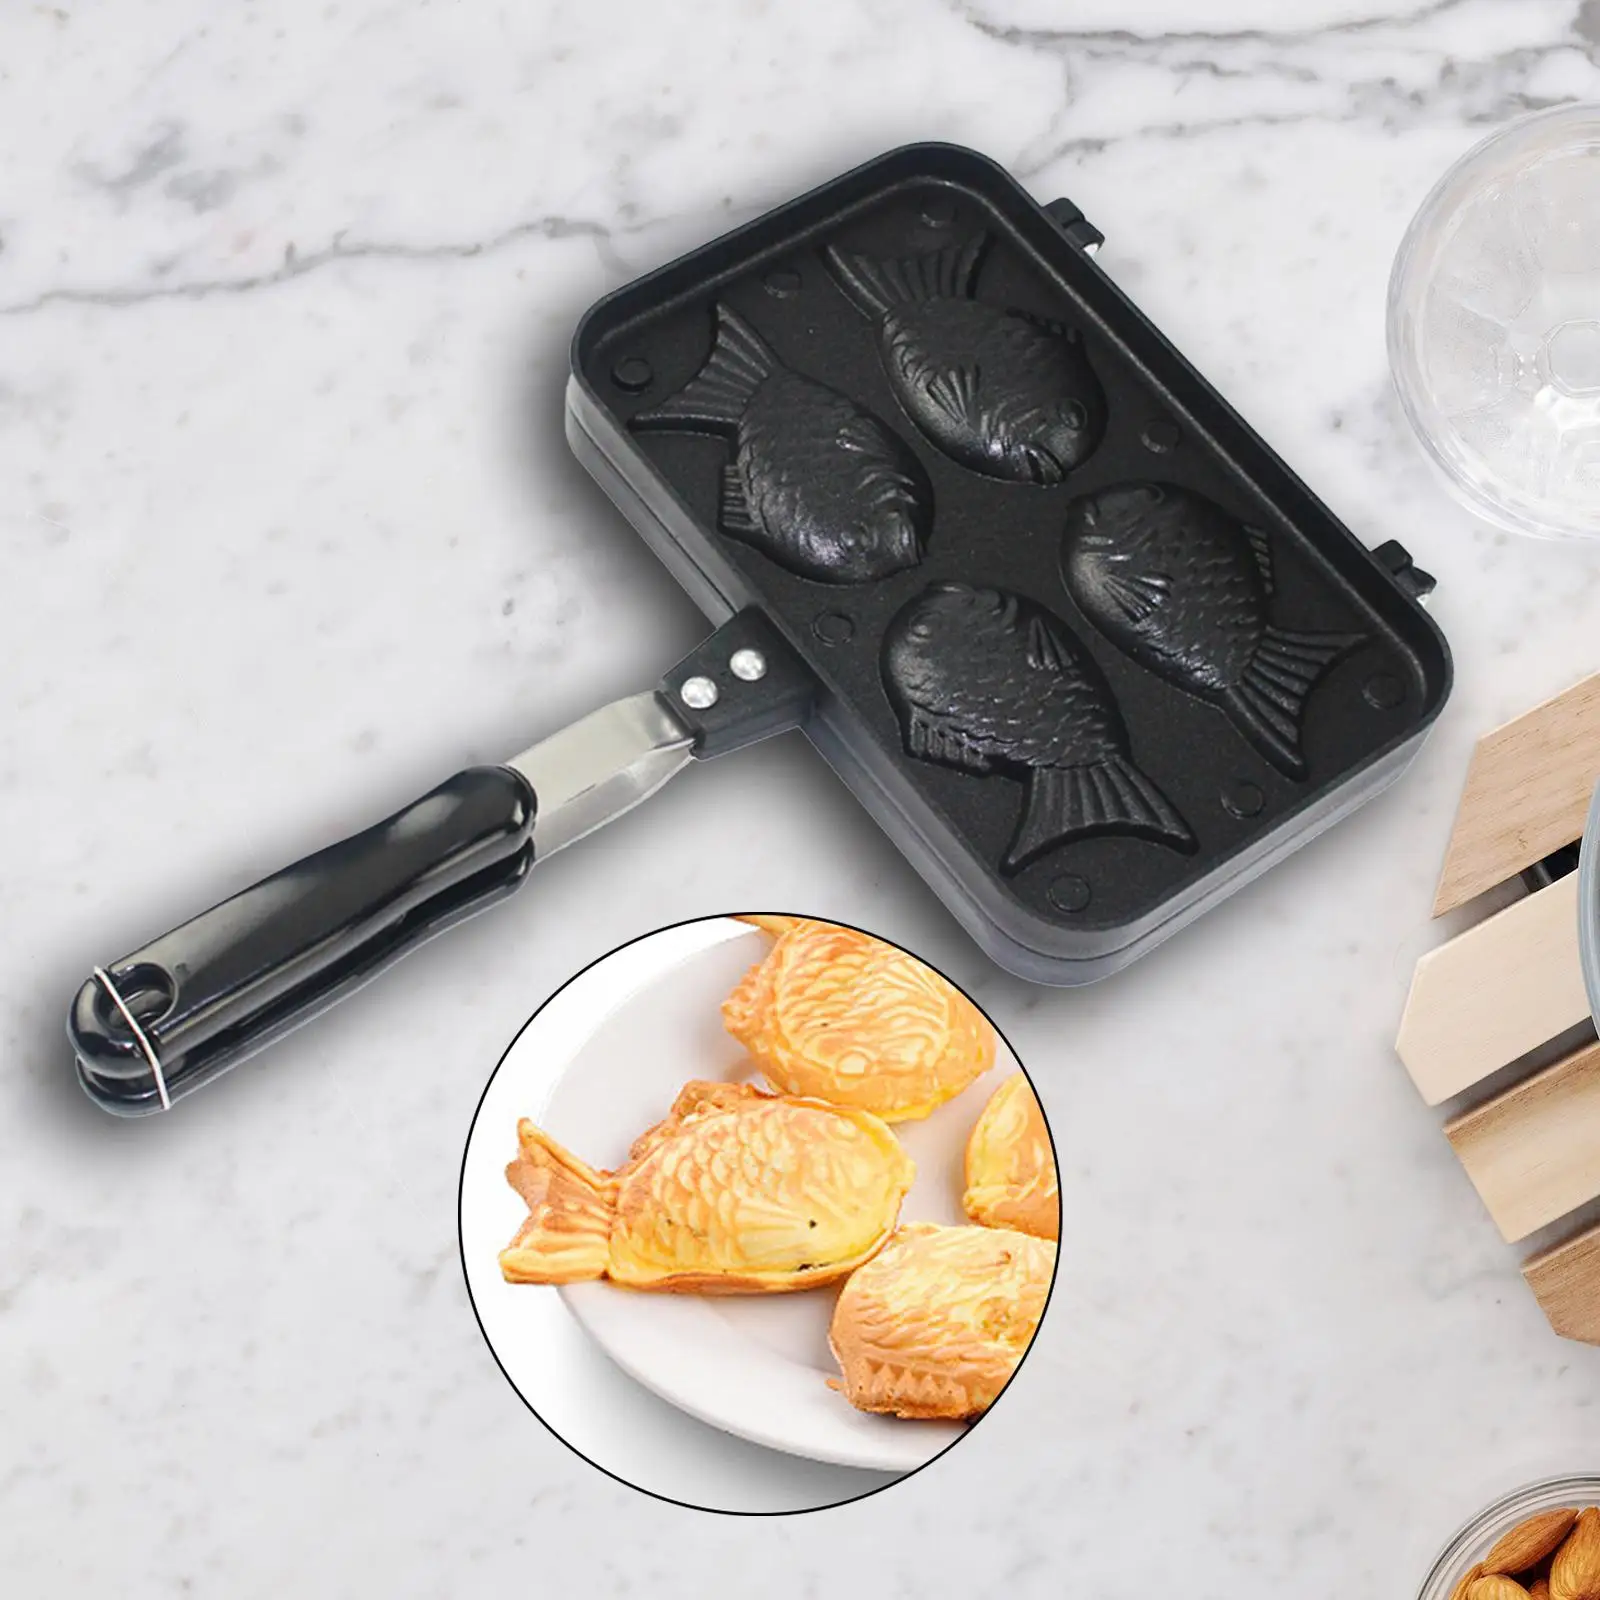 4 Fish Taiyaki Bakeware Detachable Handle Convenient Baking Maker Smooth Waffle Baking Pan Snapper Grill Plate for Outdoor Home